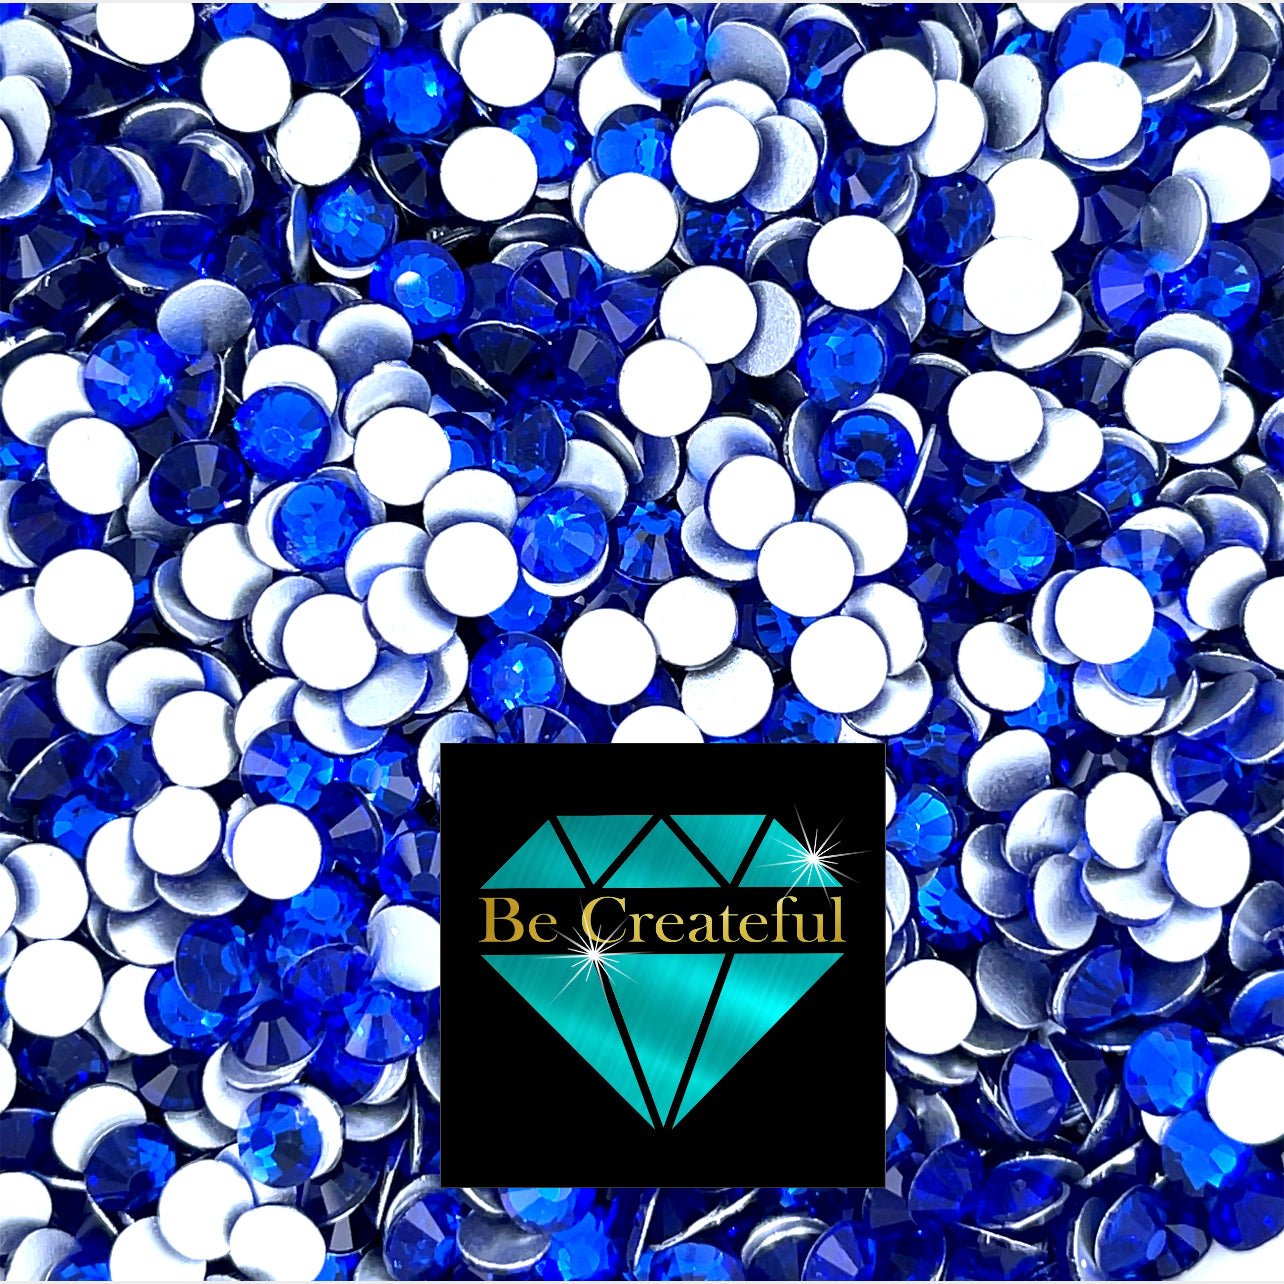 LUXE® Cobalt Blue Hotfix Glass Rhinestones - Fast Shipping! – Be